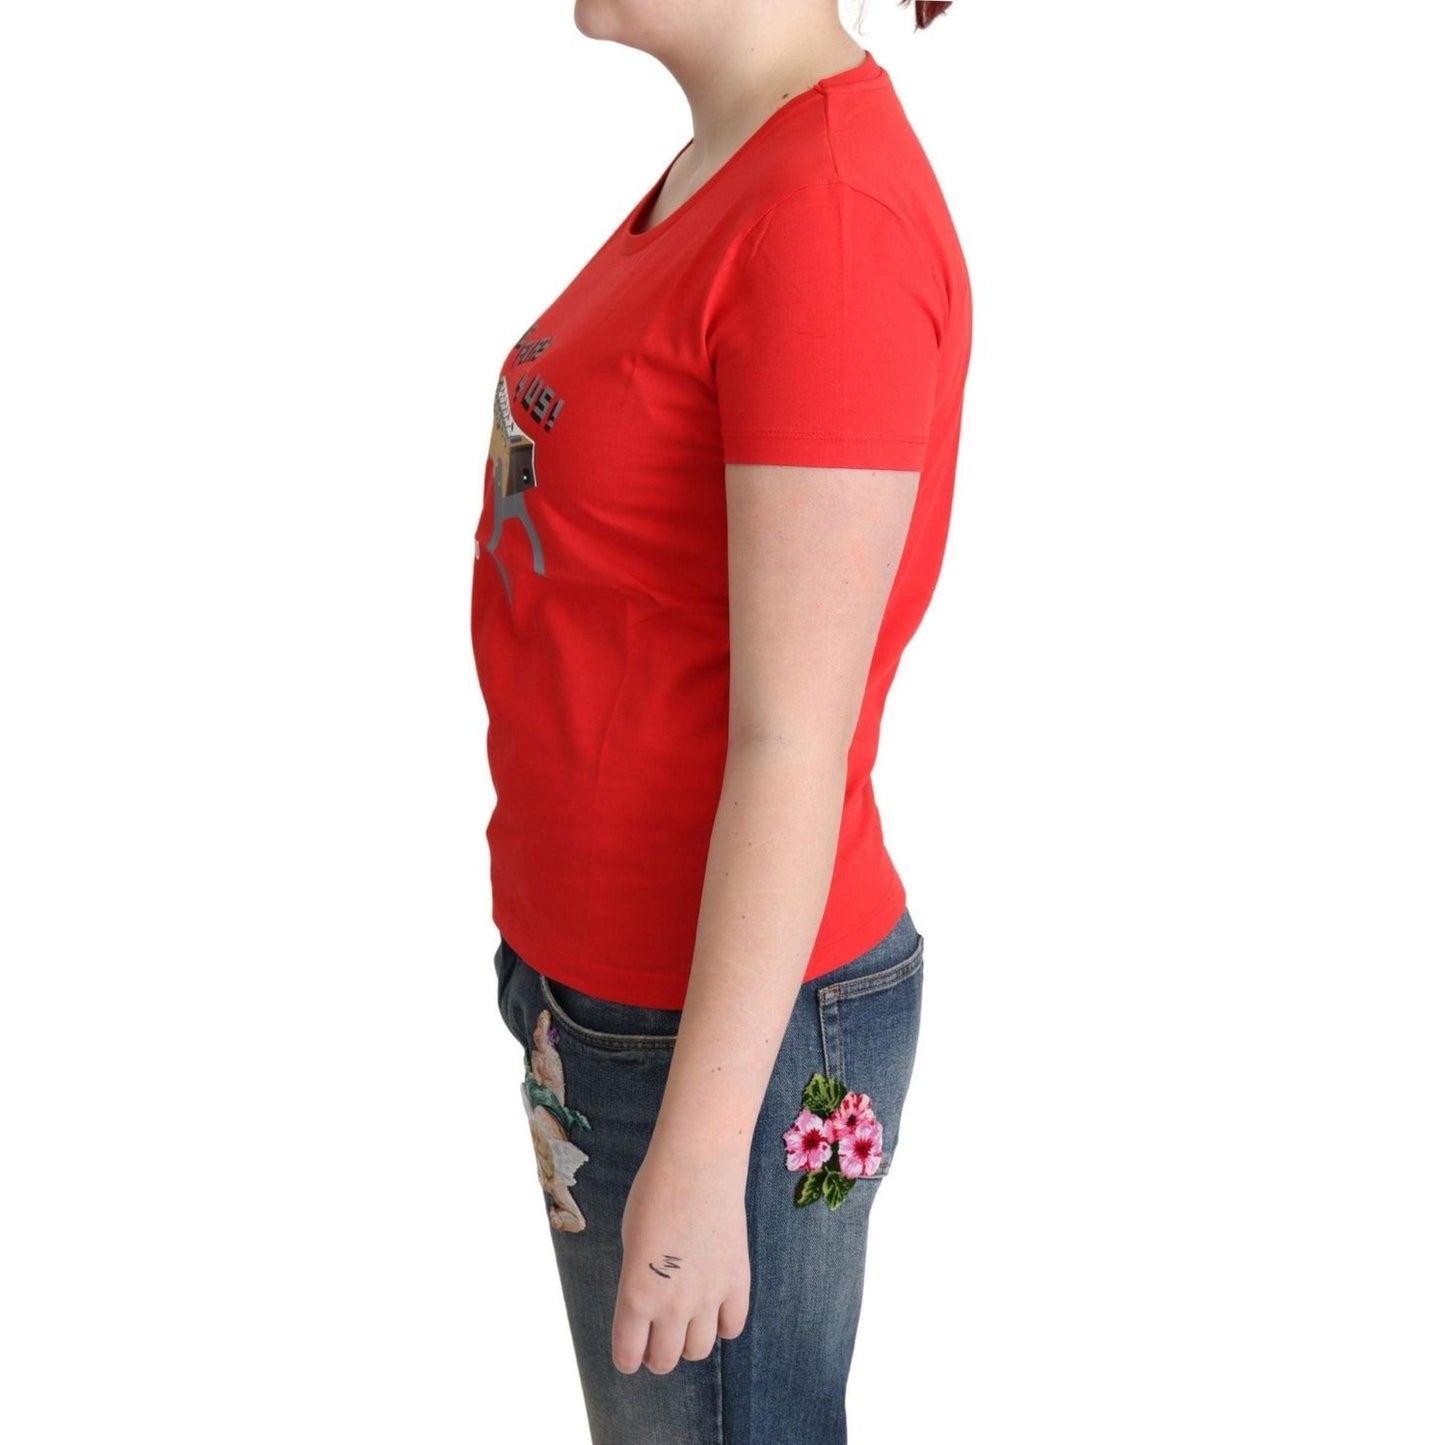 Moschino Chic Red Cotton Tee with Playful Print red-cotton-come-play-4-us-print-tops-blouse-t-shirt